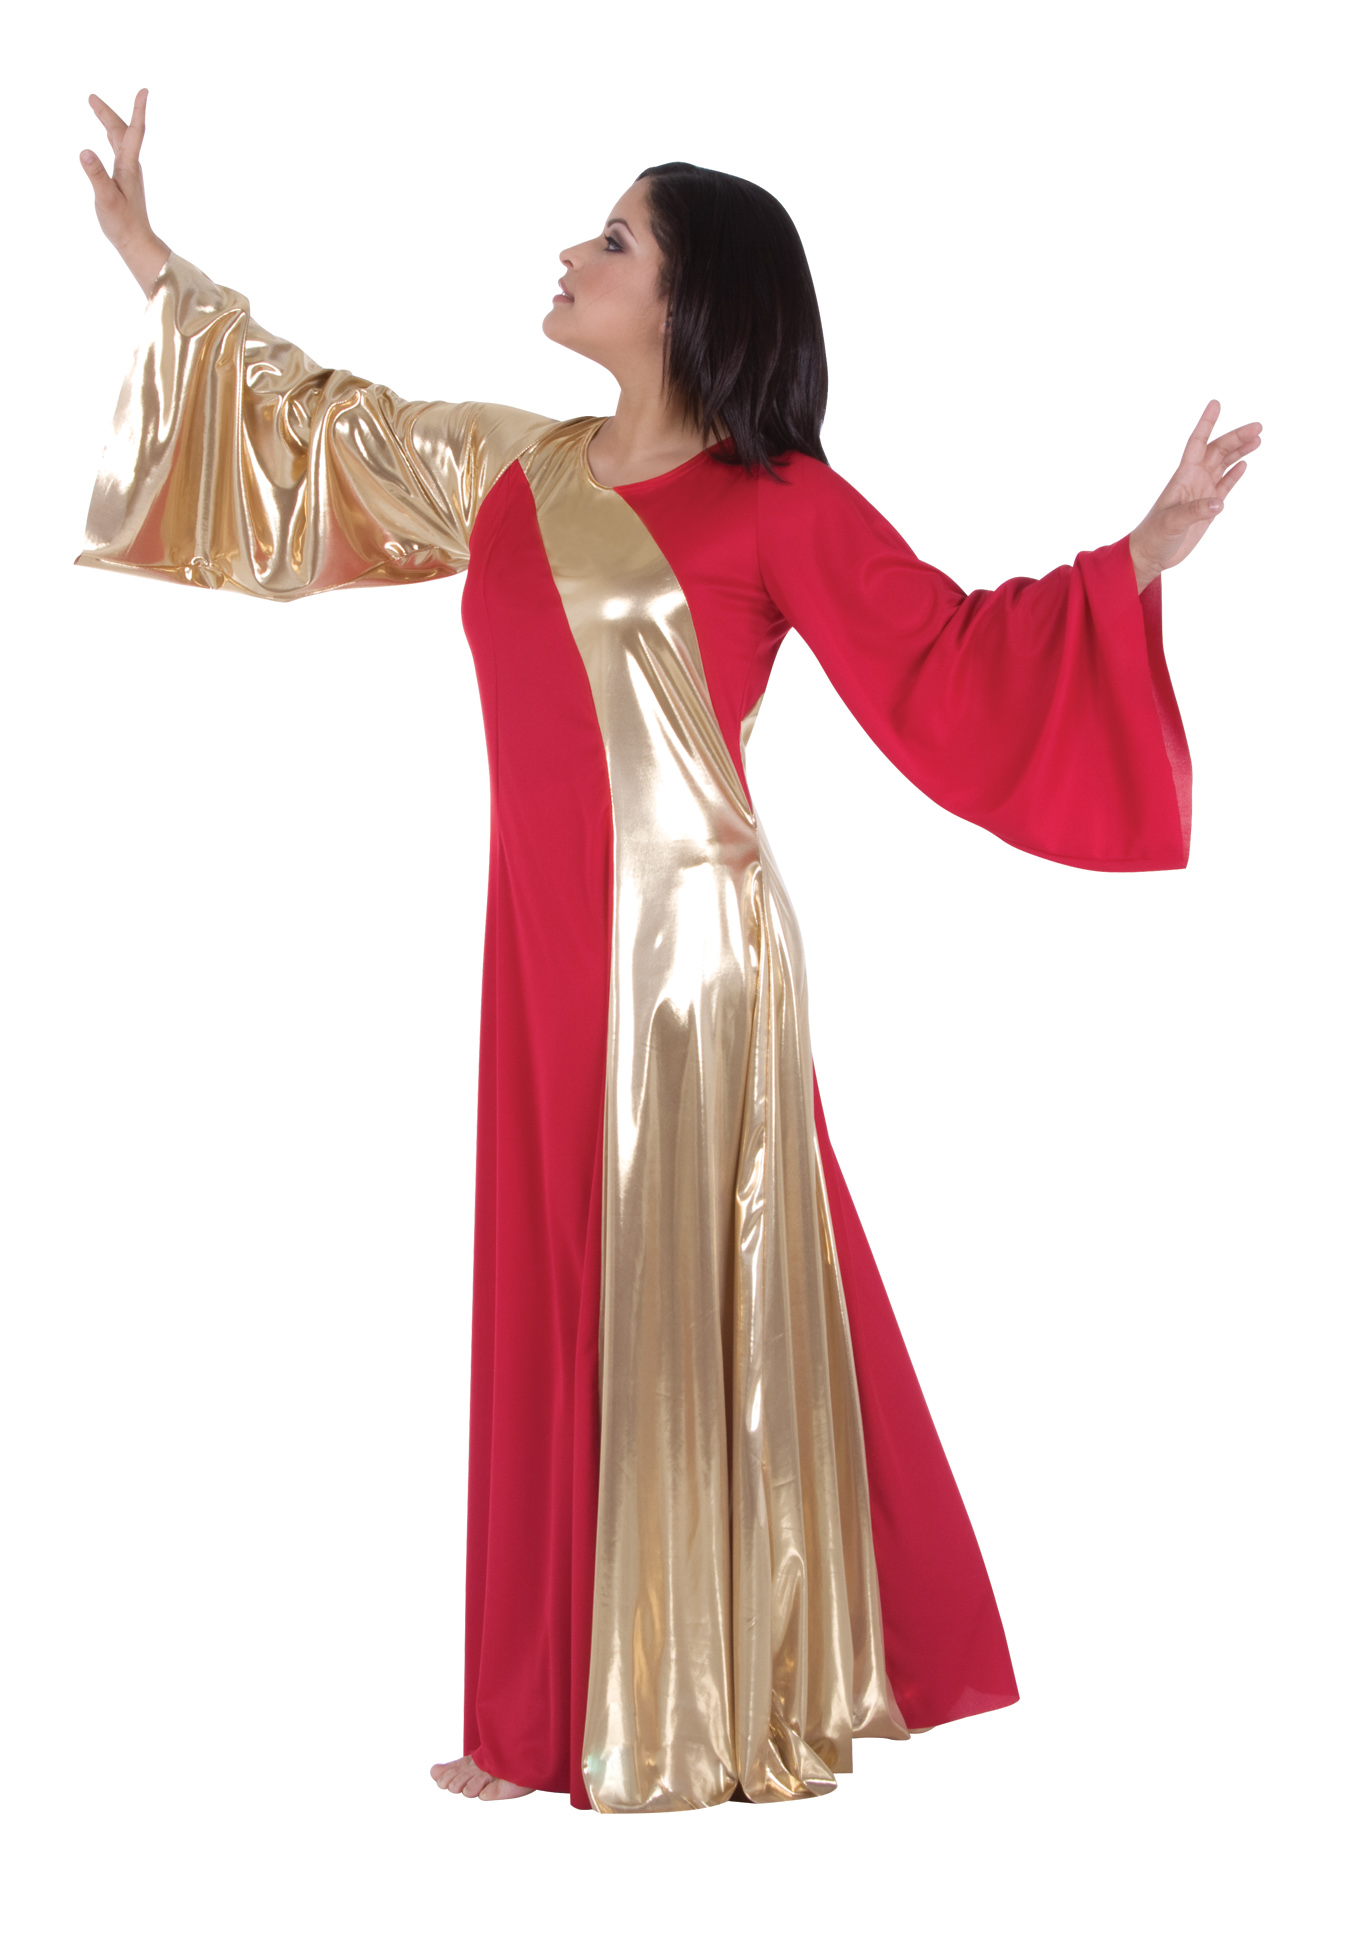 Tunic Bell Sleeve Praisewear Dance Liturgical 3 Color Choices Adult Child Sizes 